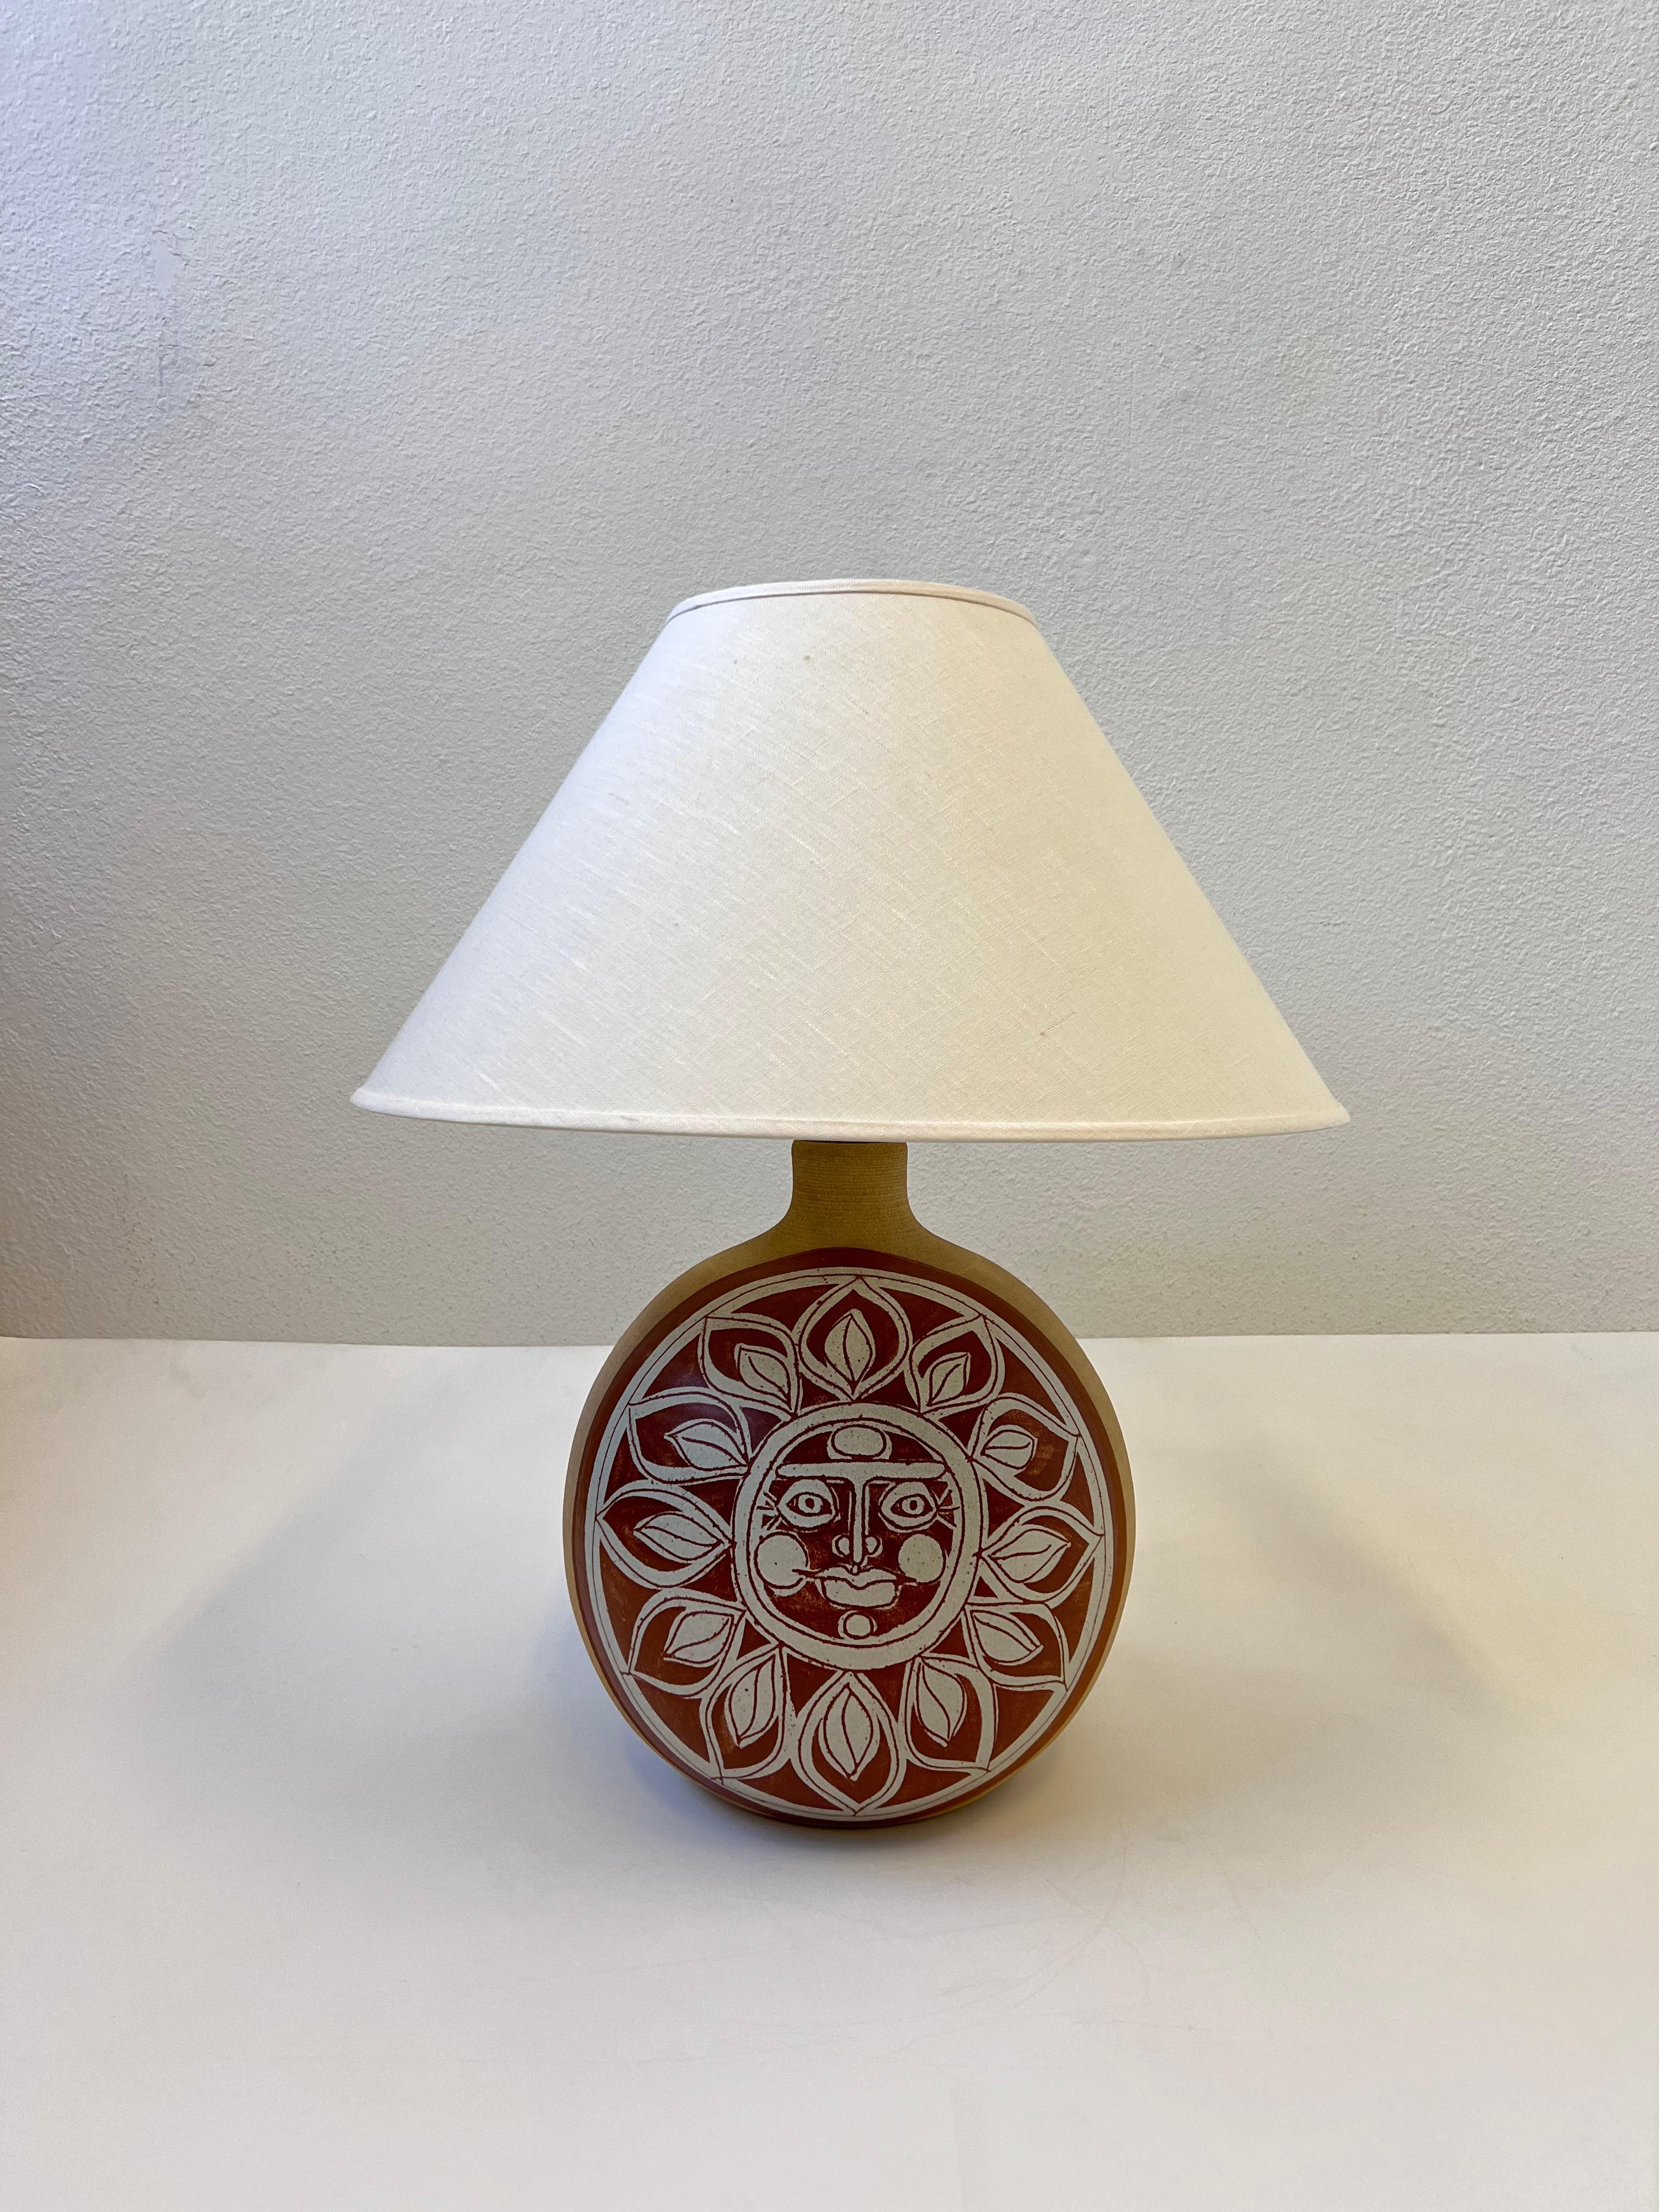 1970’s Studio ceramic sun face table lamp by Oregon ceramicist the Brown brothers Larry and Terry Brown. The hardware is as found condition, we can have it polished if desired. 

Newly rewired and new Shade. 
It takes one 100w max Edison lightbulb.